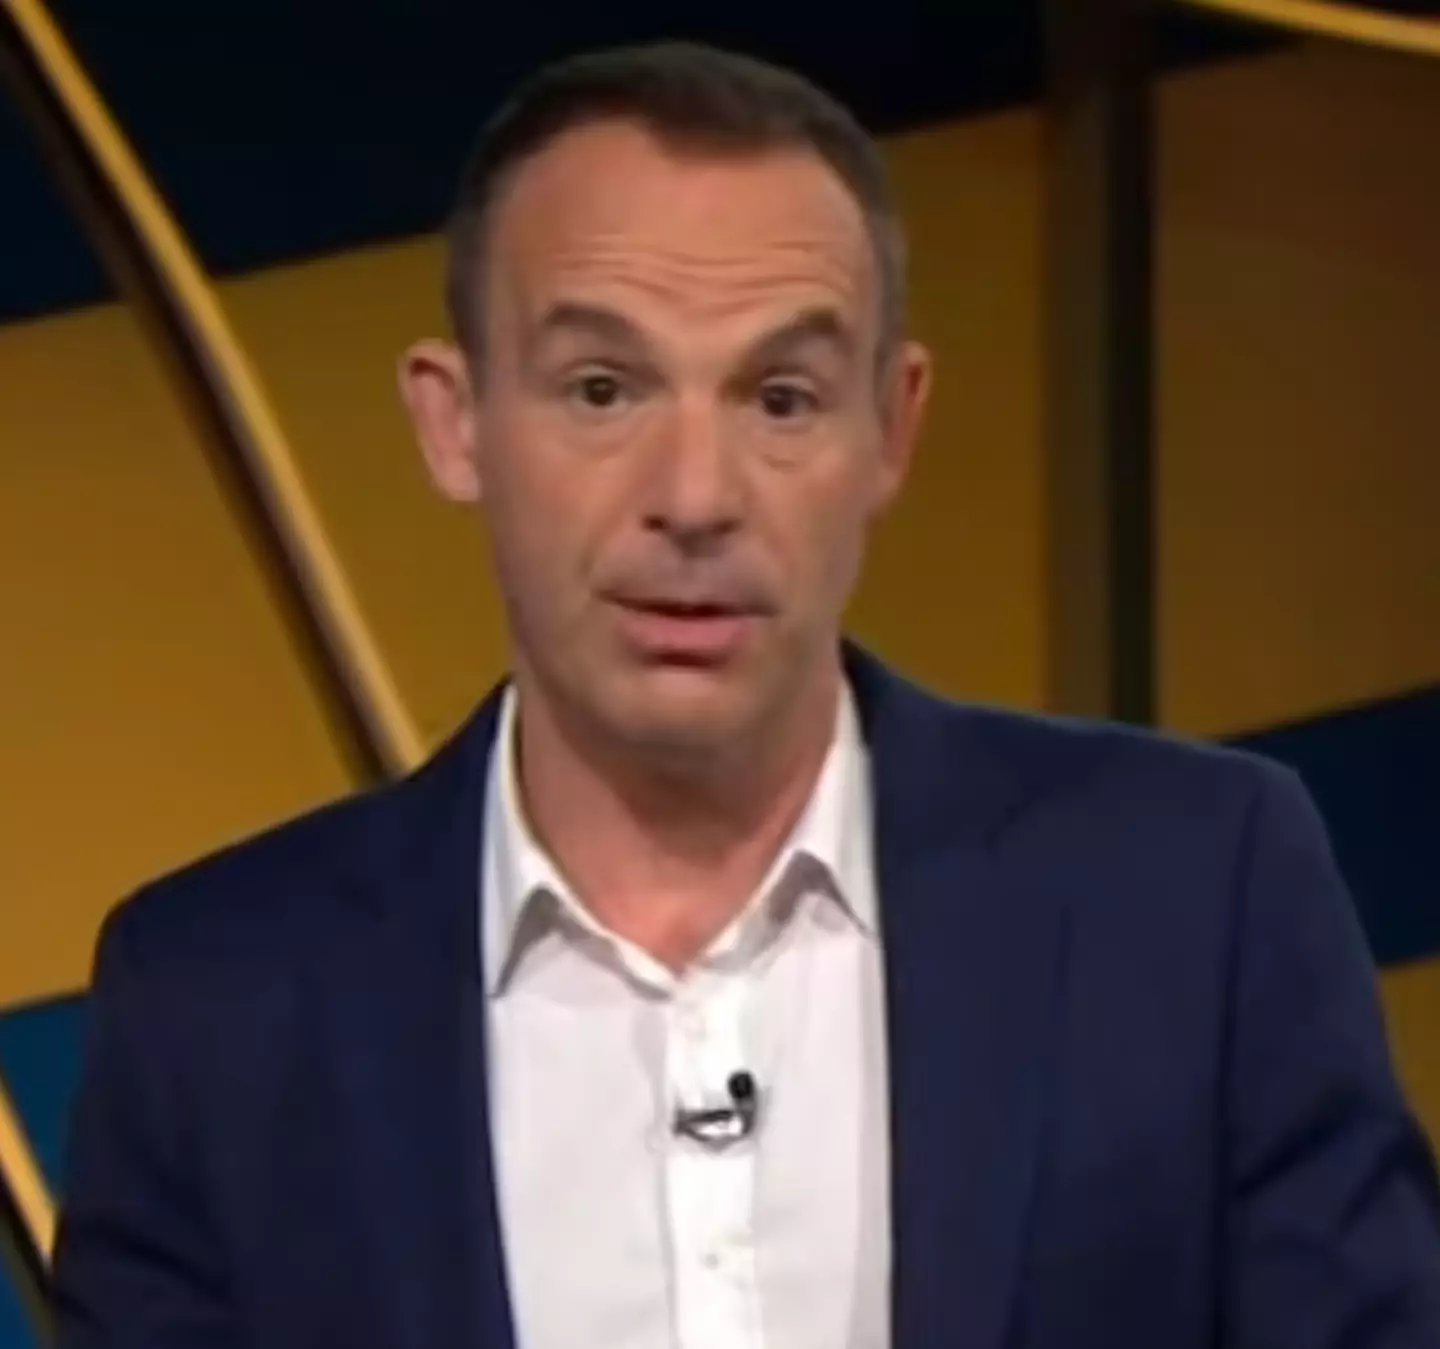 Martin Lewis has offered advice on how to make hundreds of pounds.